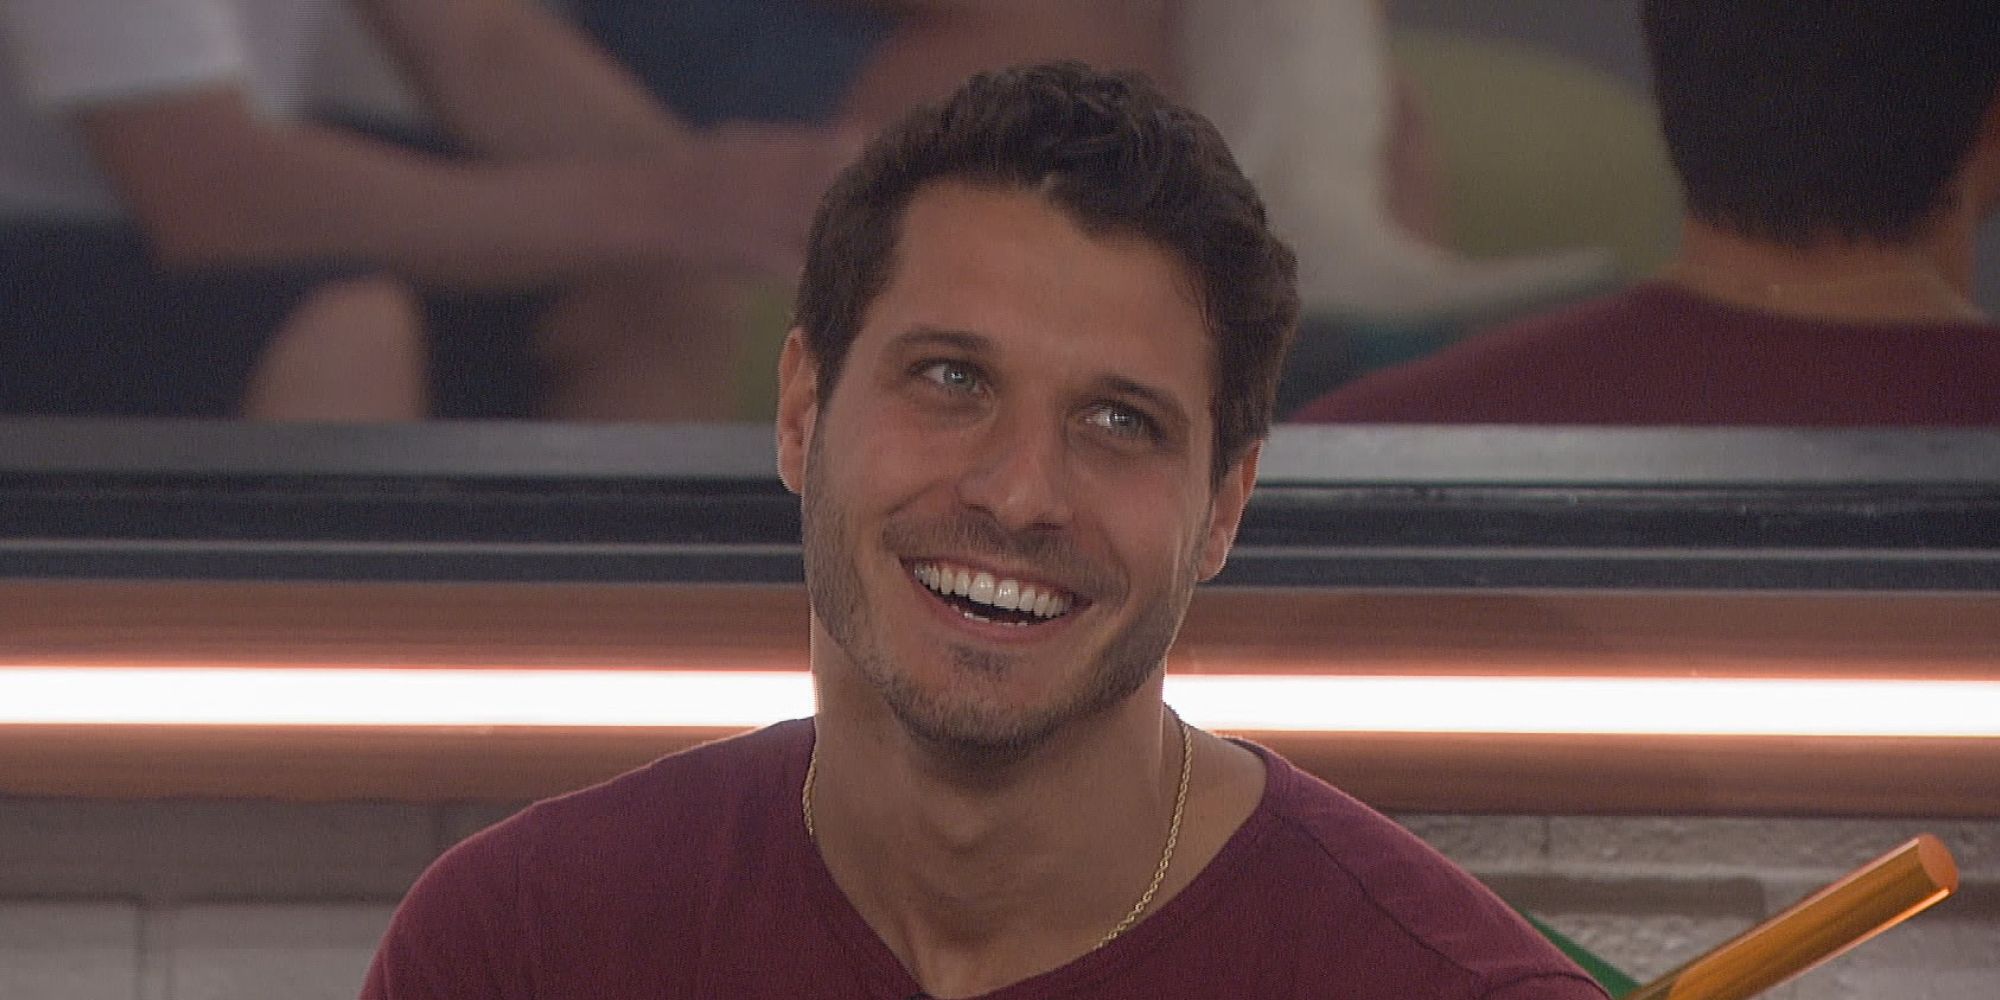 Cody from Big Brother, headed cocked to the side, smiling.